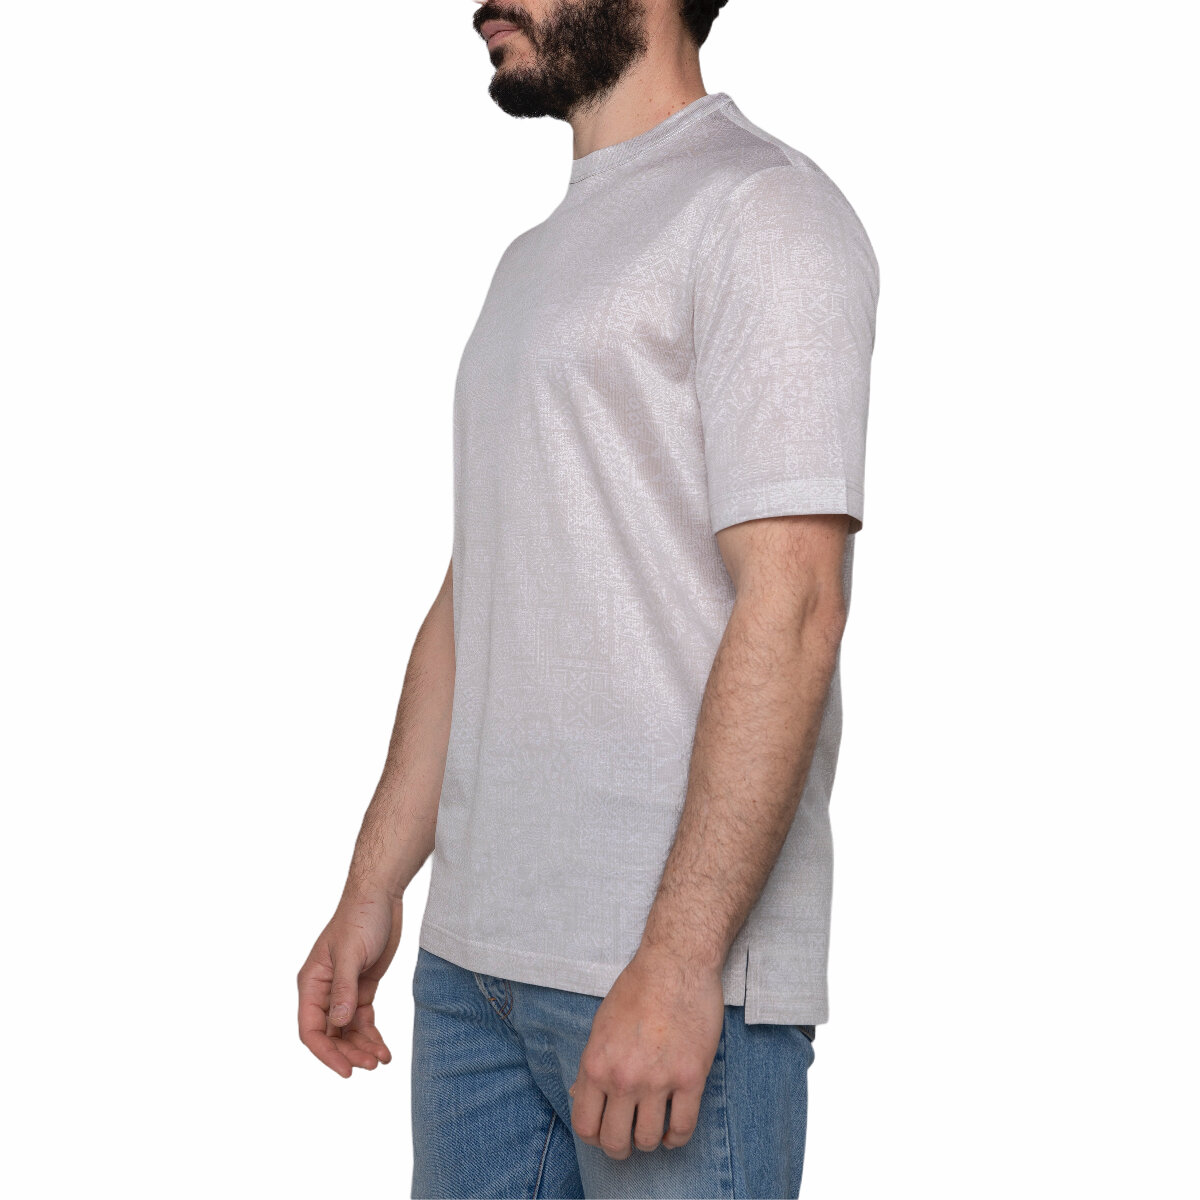 100% cotton jacquard T-SHIRT, white refined pattern, made in Italy